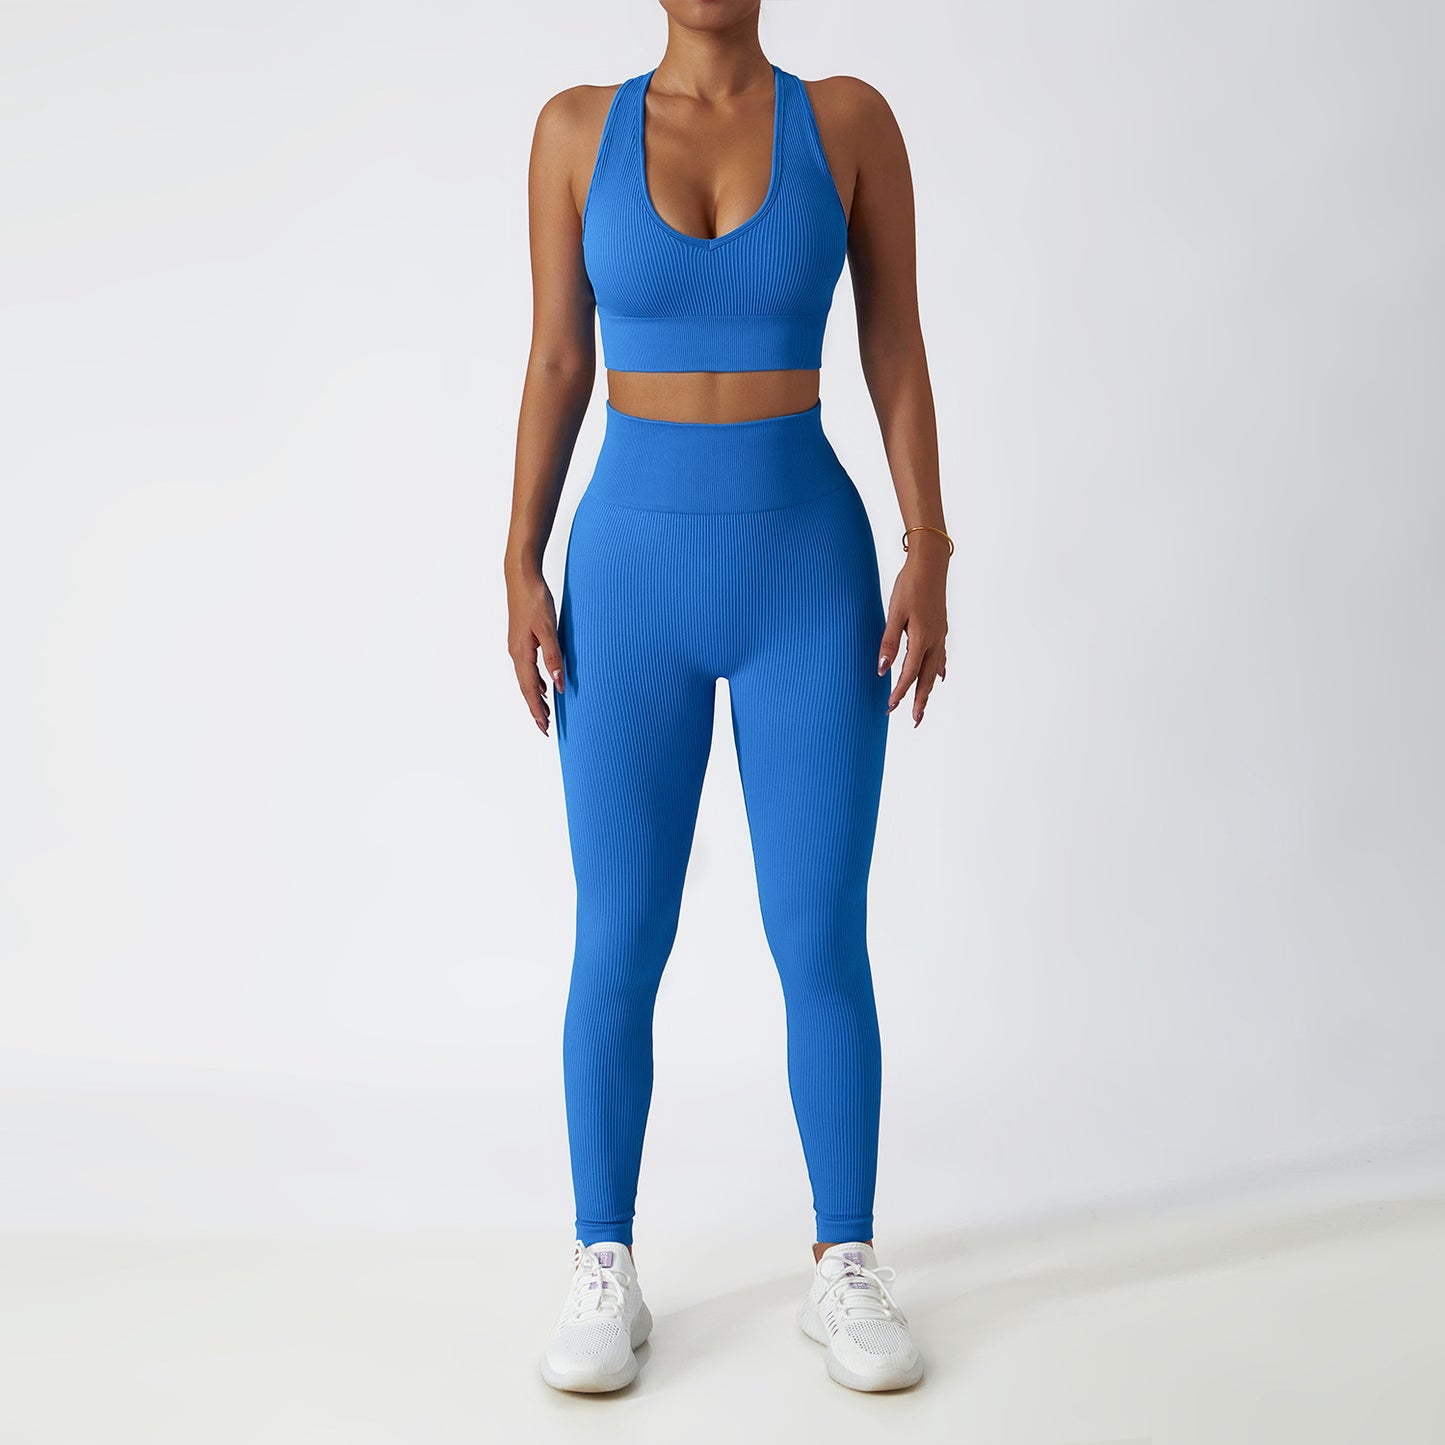 High Waist Tight Sports Yoga Suit Women Gather Back Beauty Fitness Suit